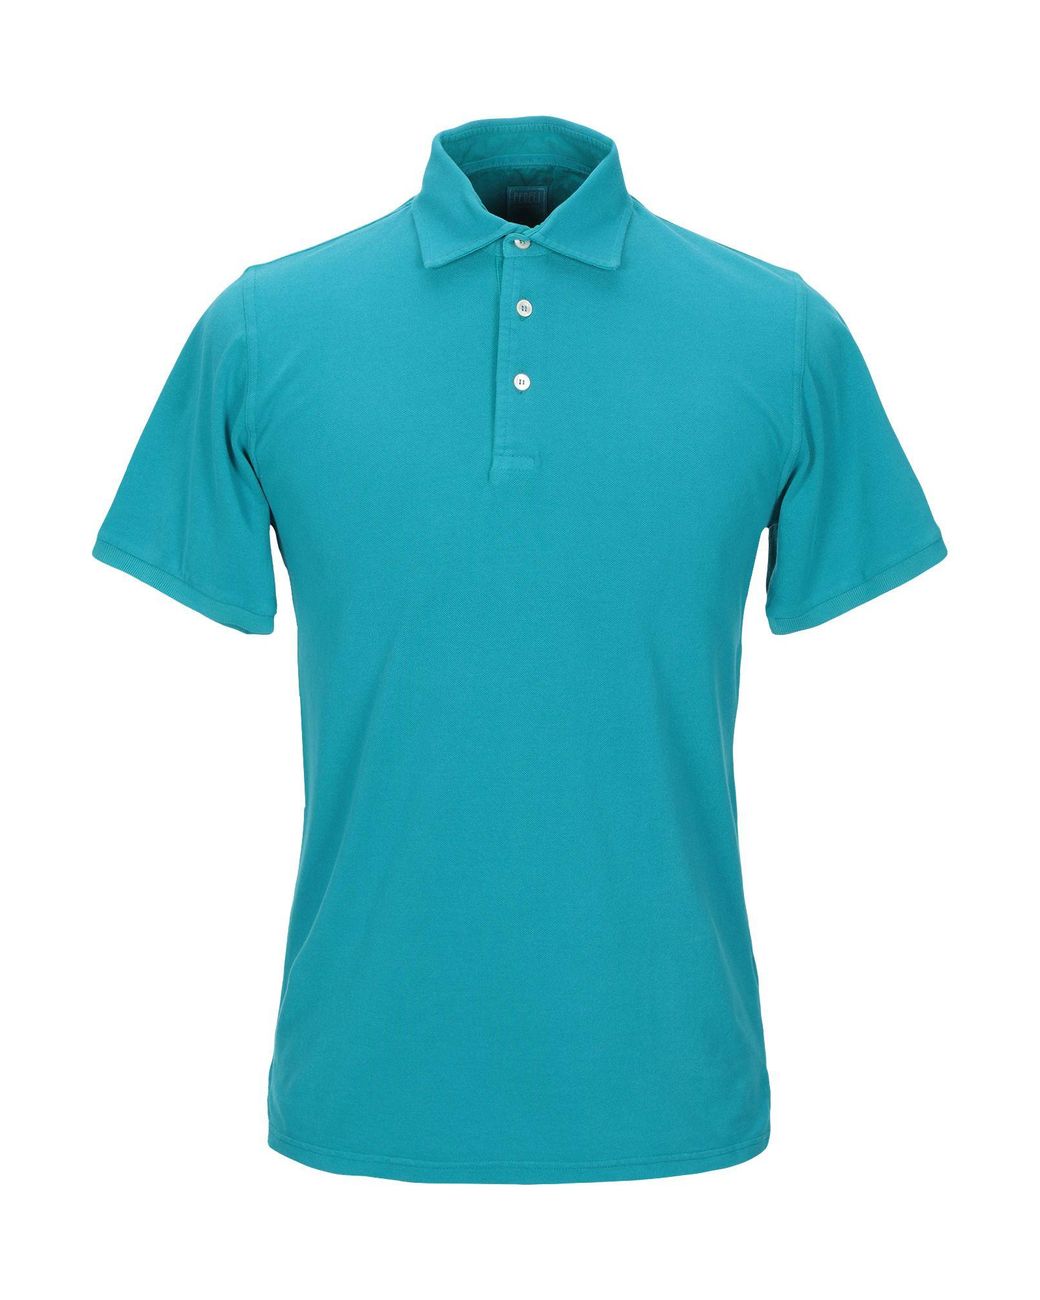 Fedeli Polo Shirt in Turquoise (Blue) for Men - Lyst